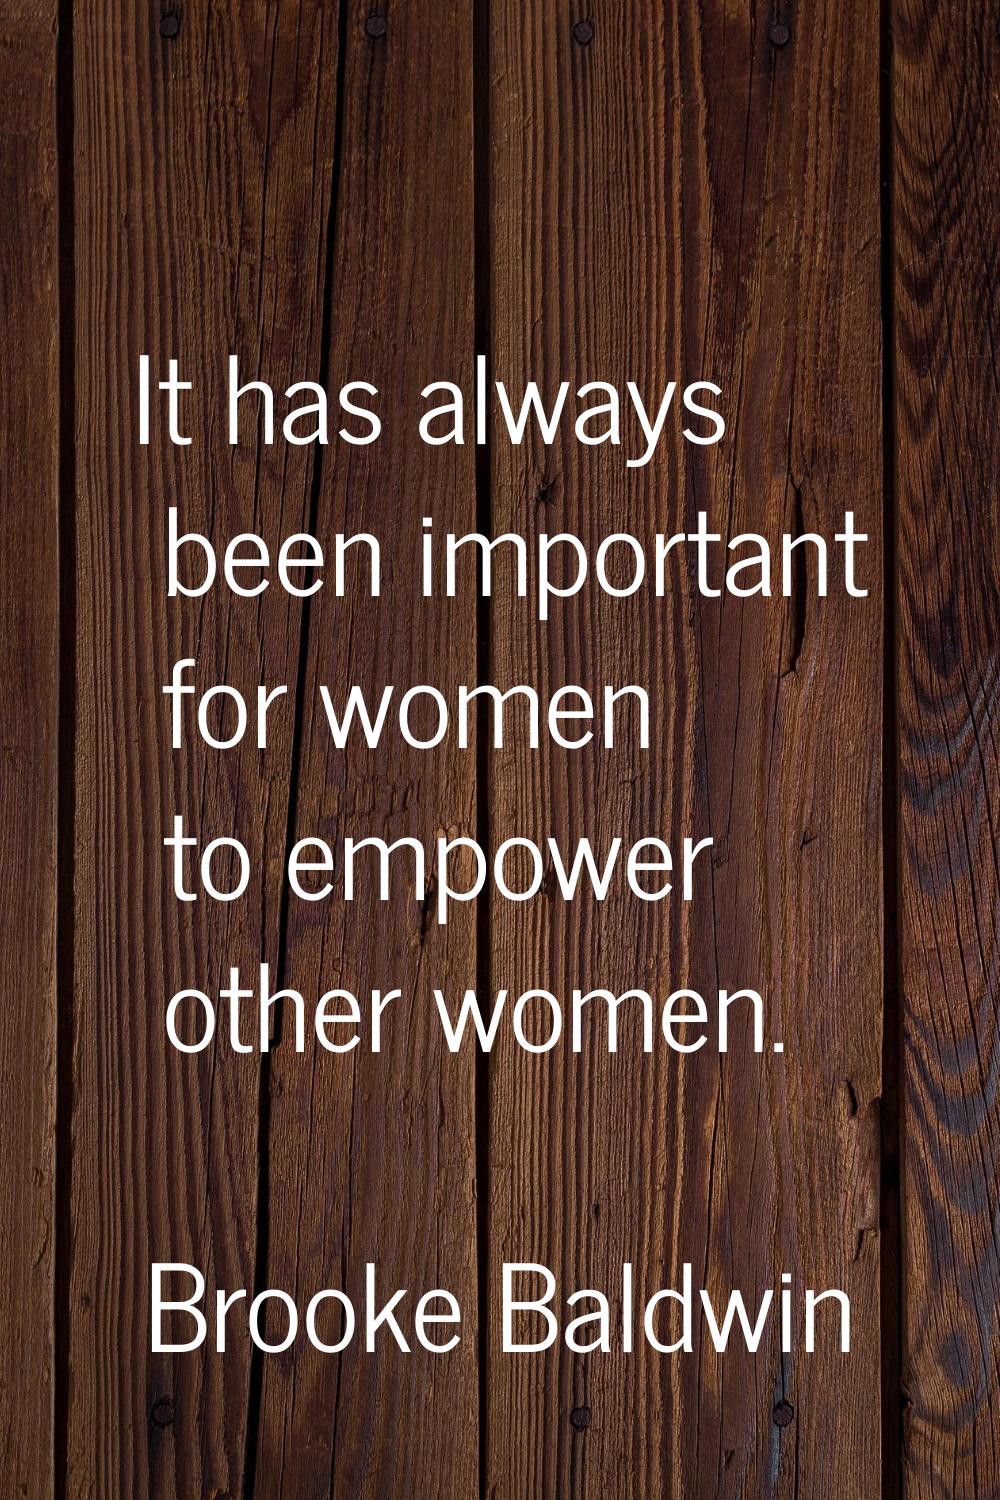 It has always been important for women to empower other women.